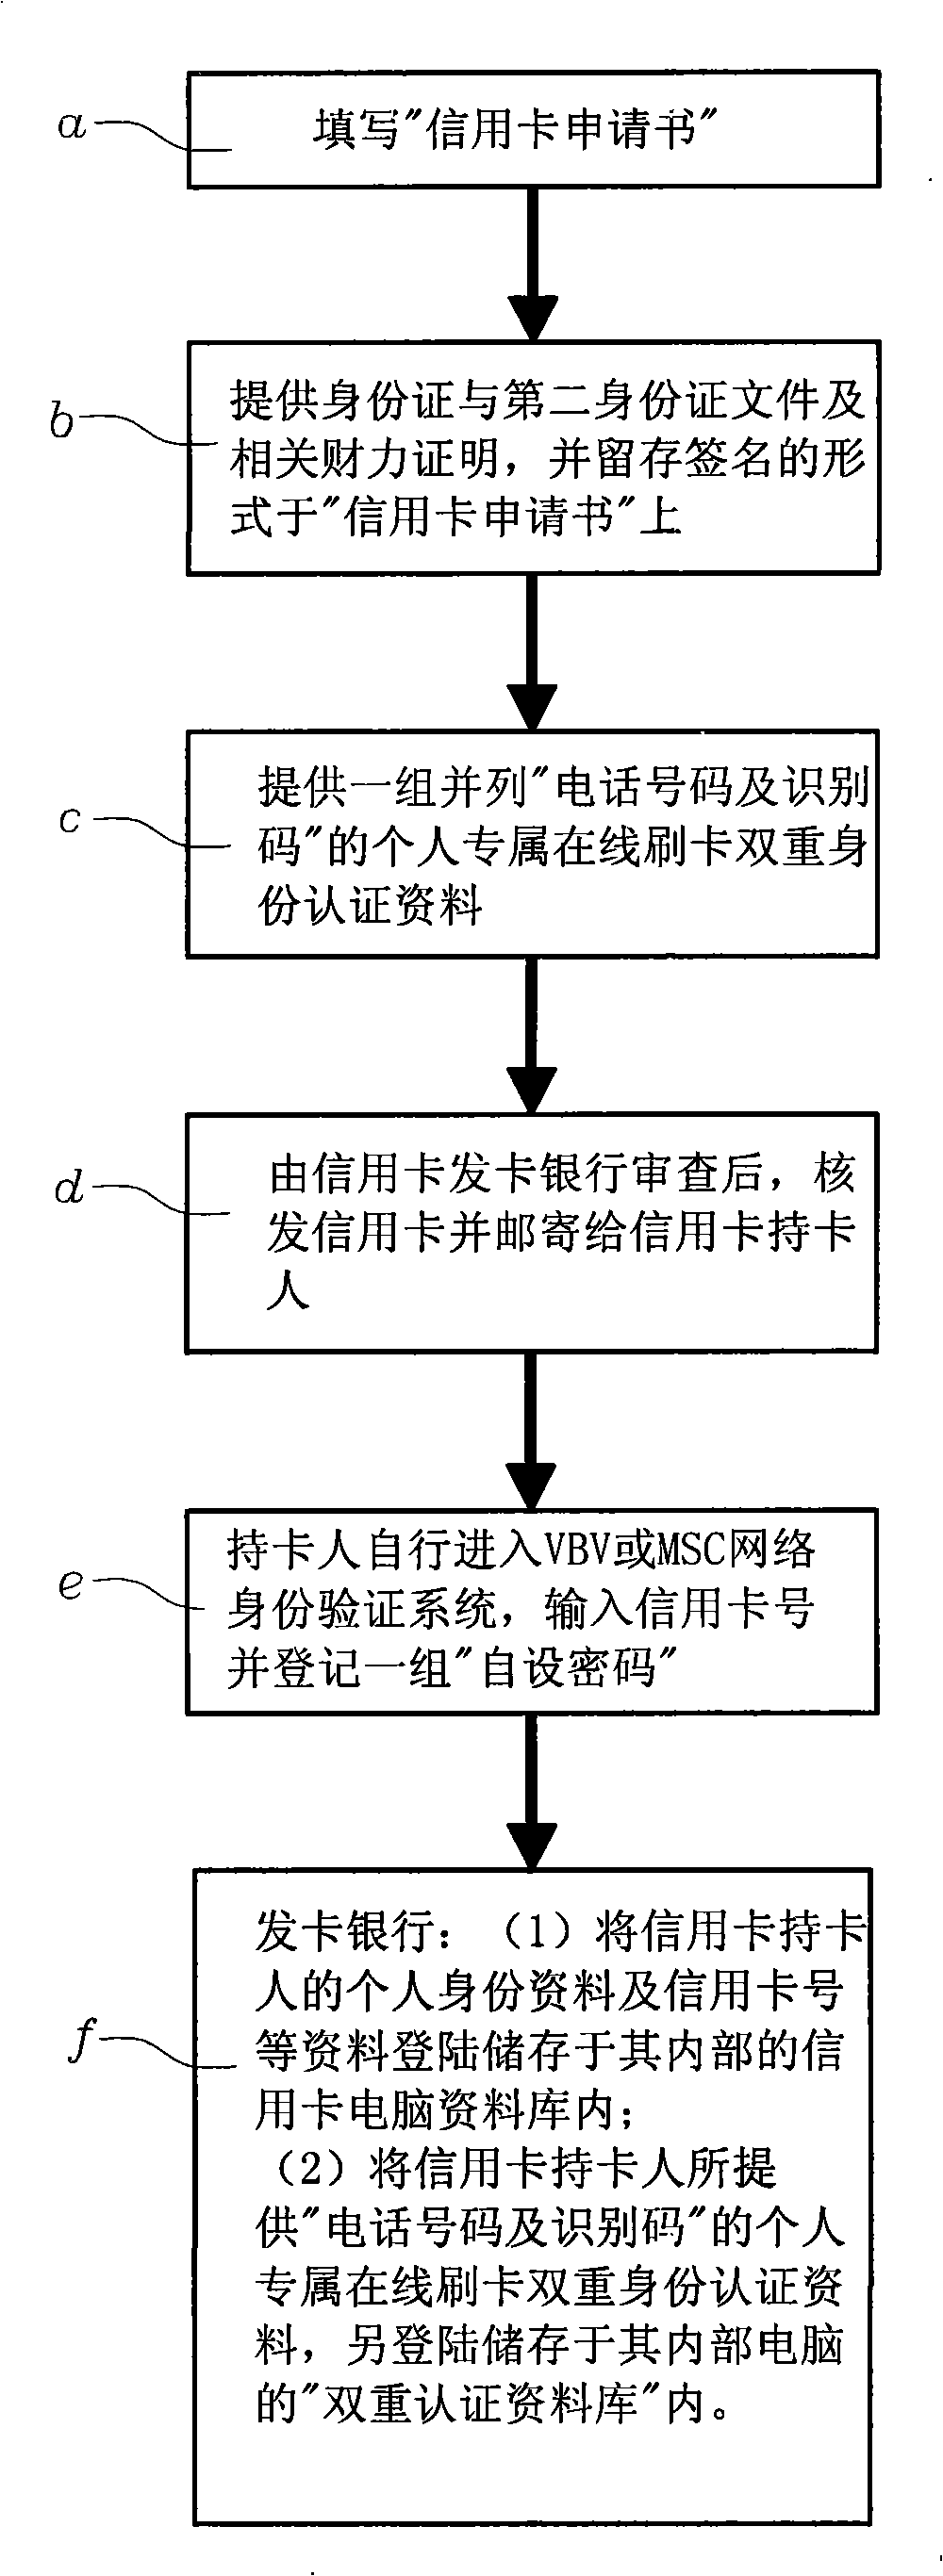 Method for network on-line payment double authentication by telephone and identifying card